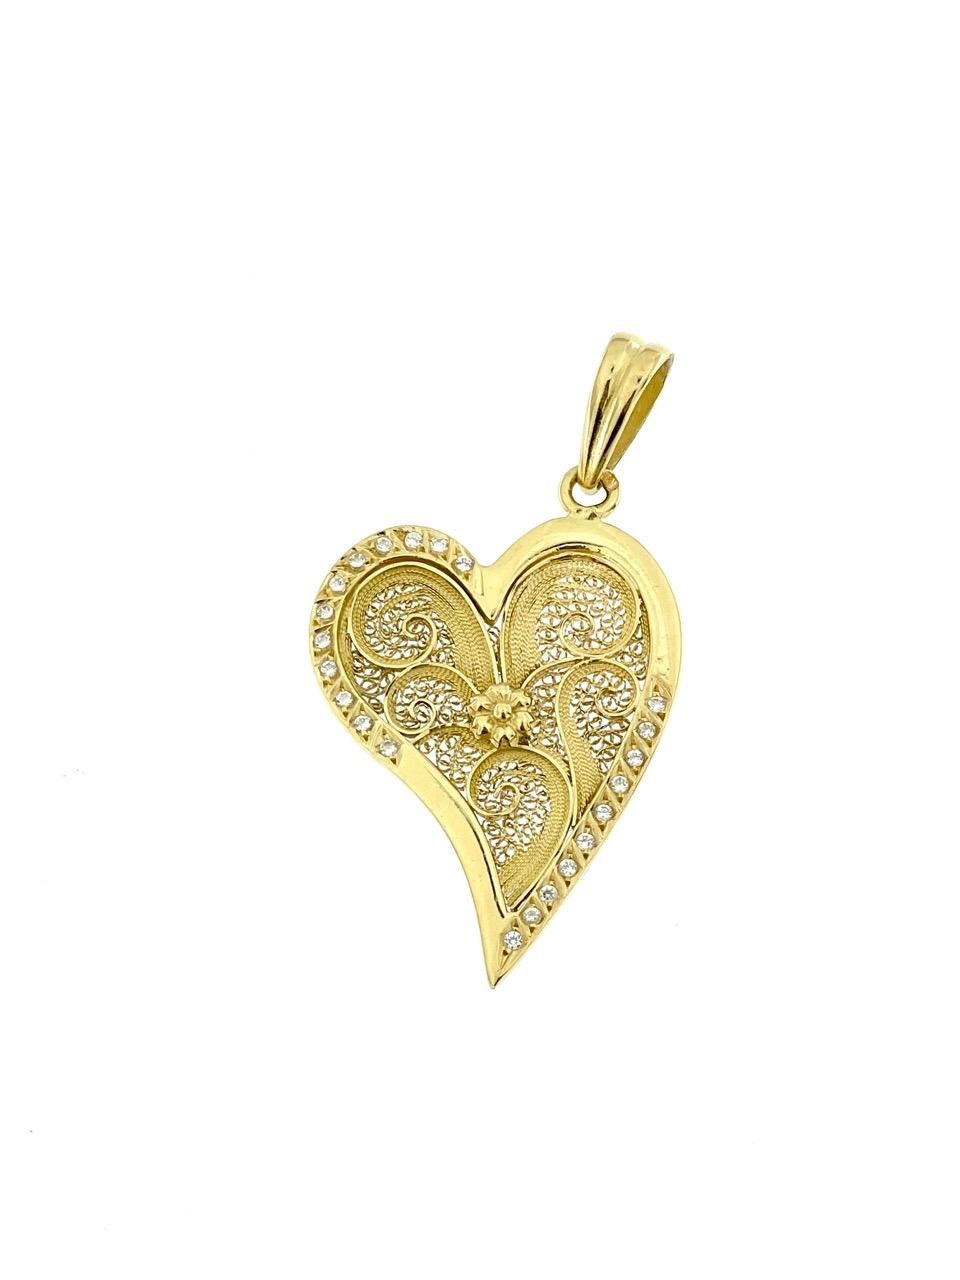 The Portuguese Heart Pendant in Yellow Gold with Zircons is a captivating piece of jewelry that exudes elegance and cultural charm. Crafted with meticulous attention to detail, this pendant features a heart-shaped design, a symbol of love and